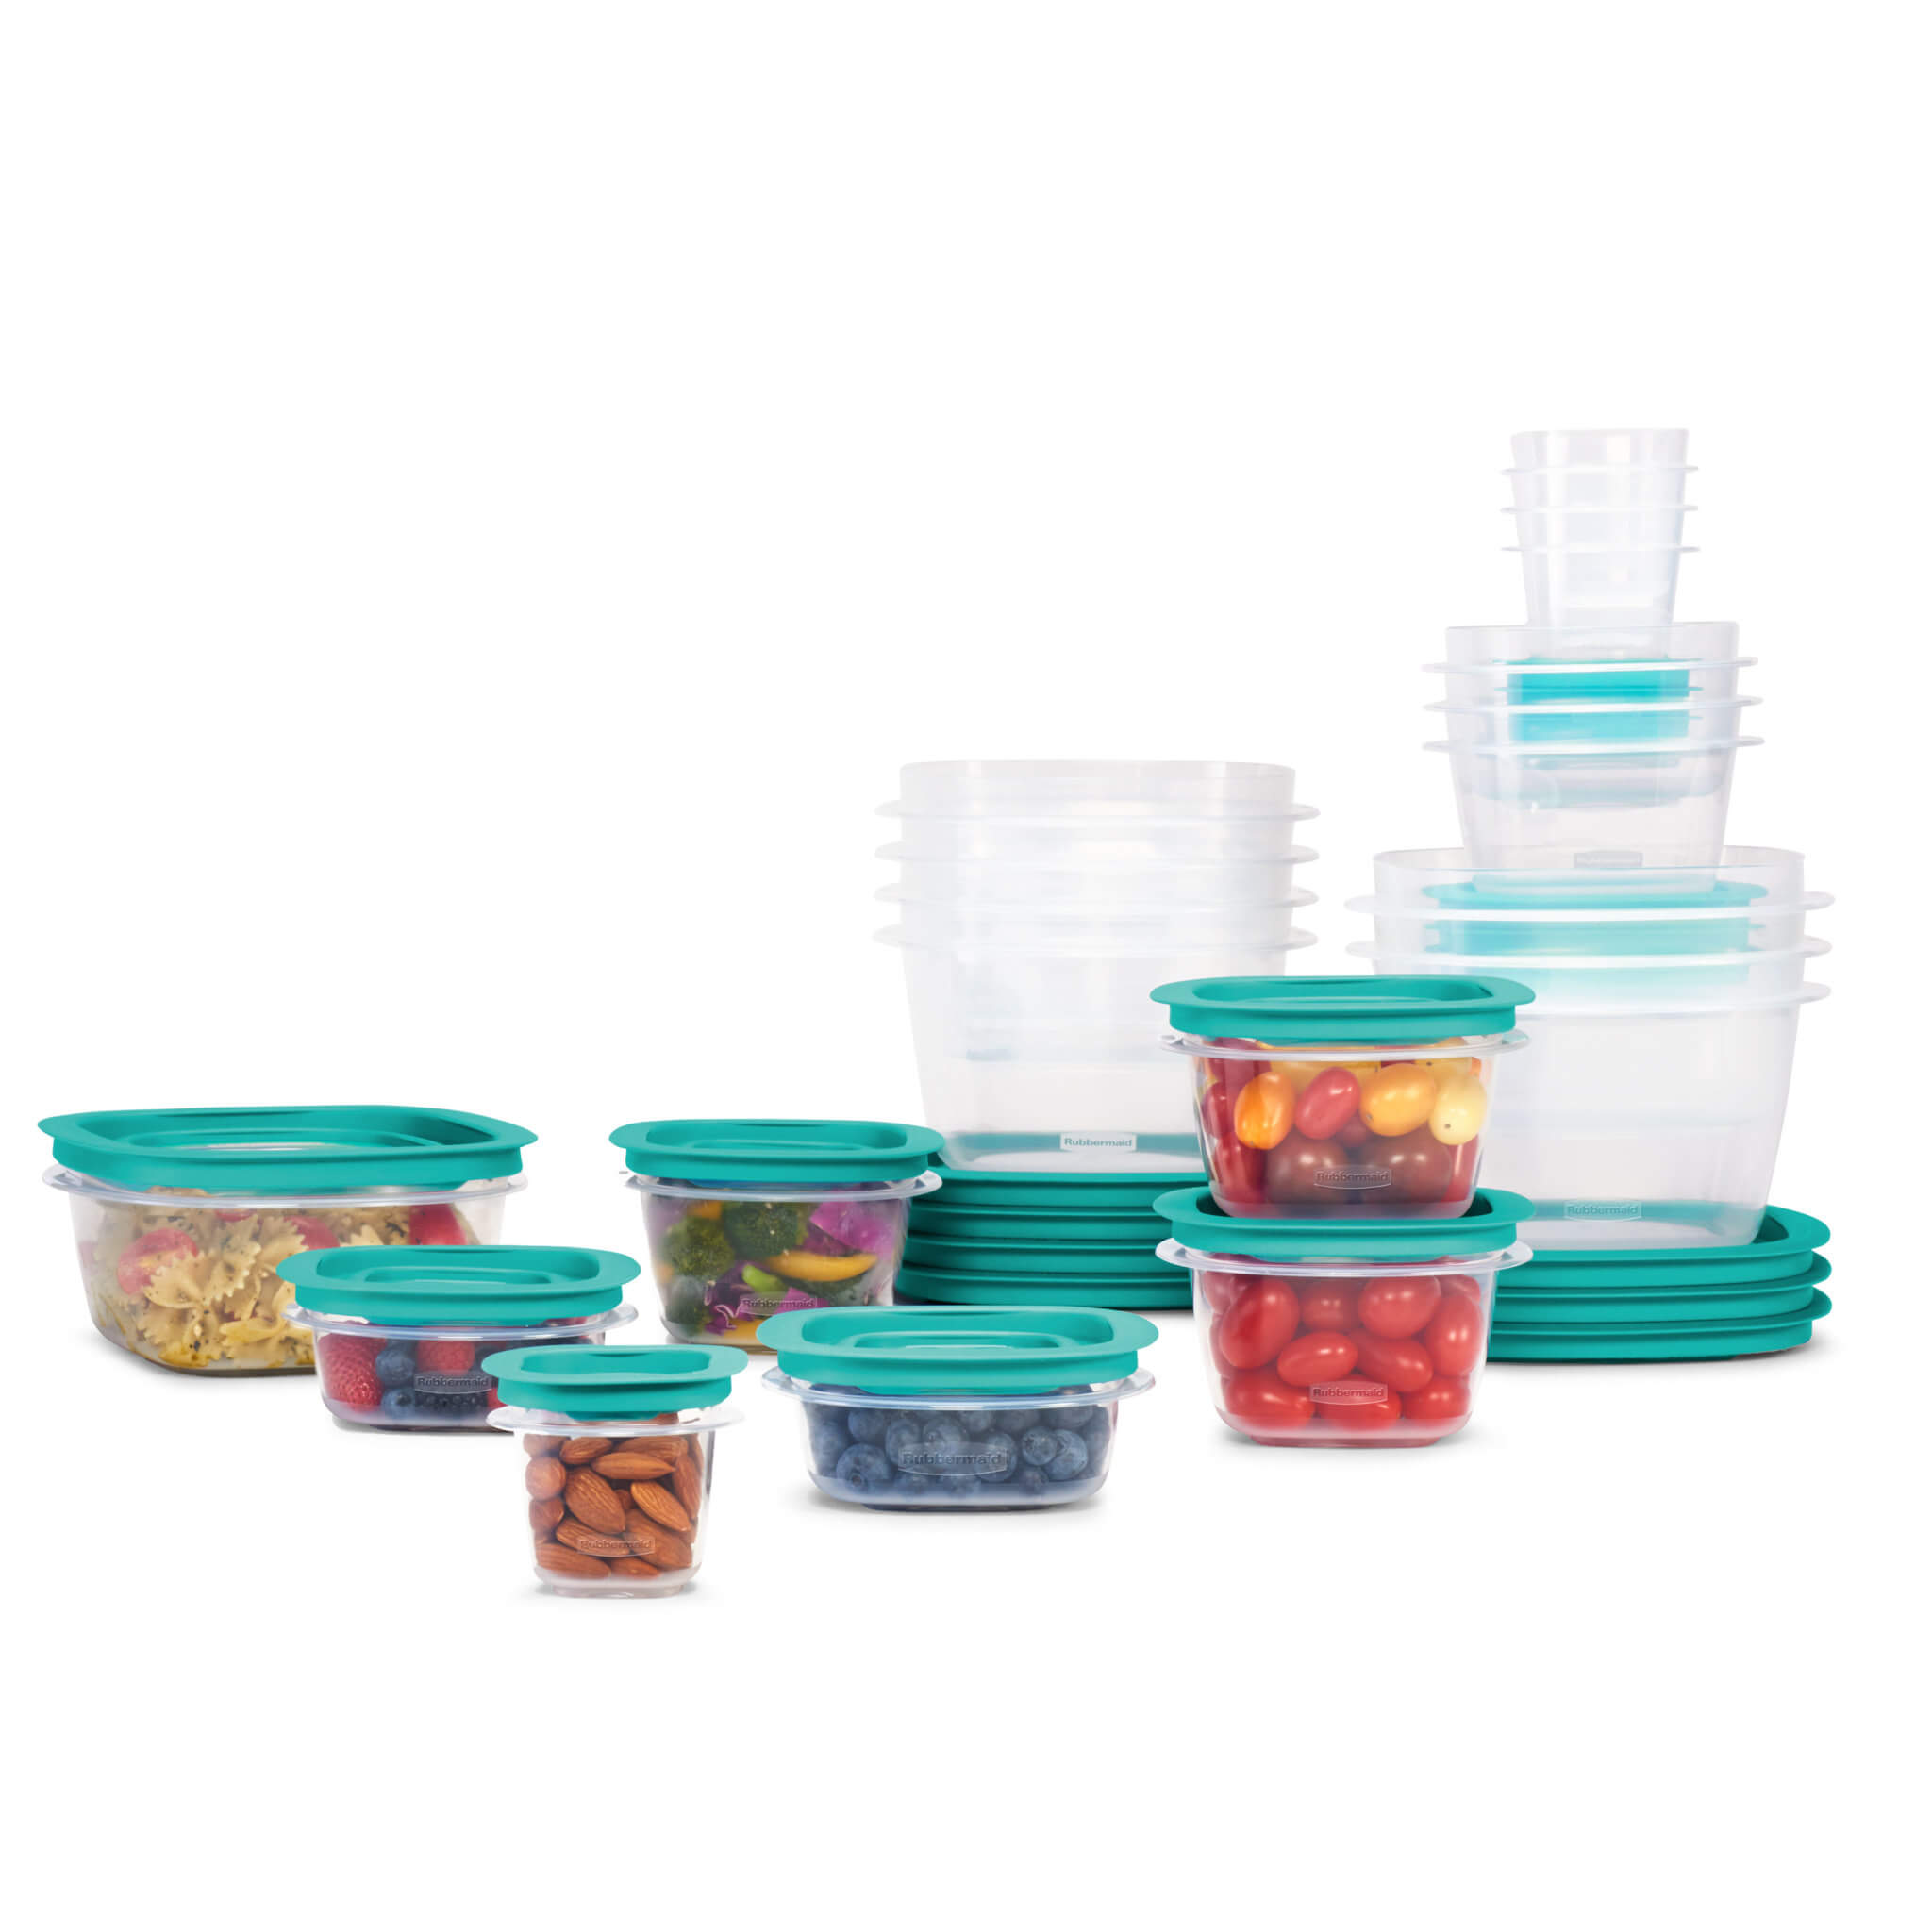 Rubbermaid Press & Lock Easy Find Lids Food Storage Containers ONLY $17.99 (Reg $40)